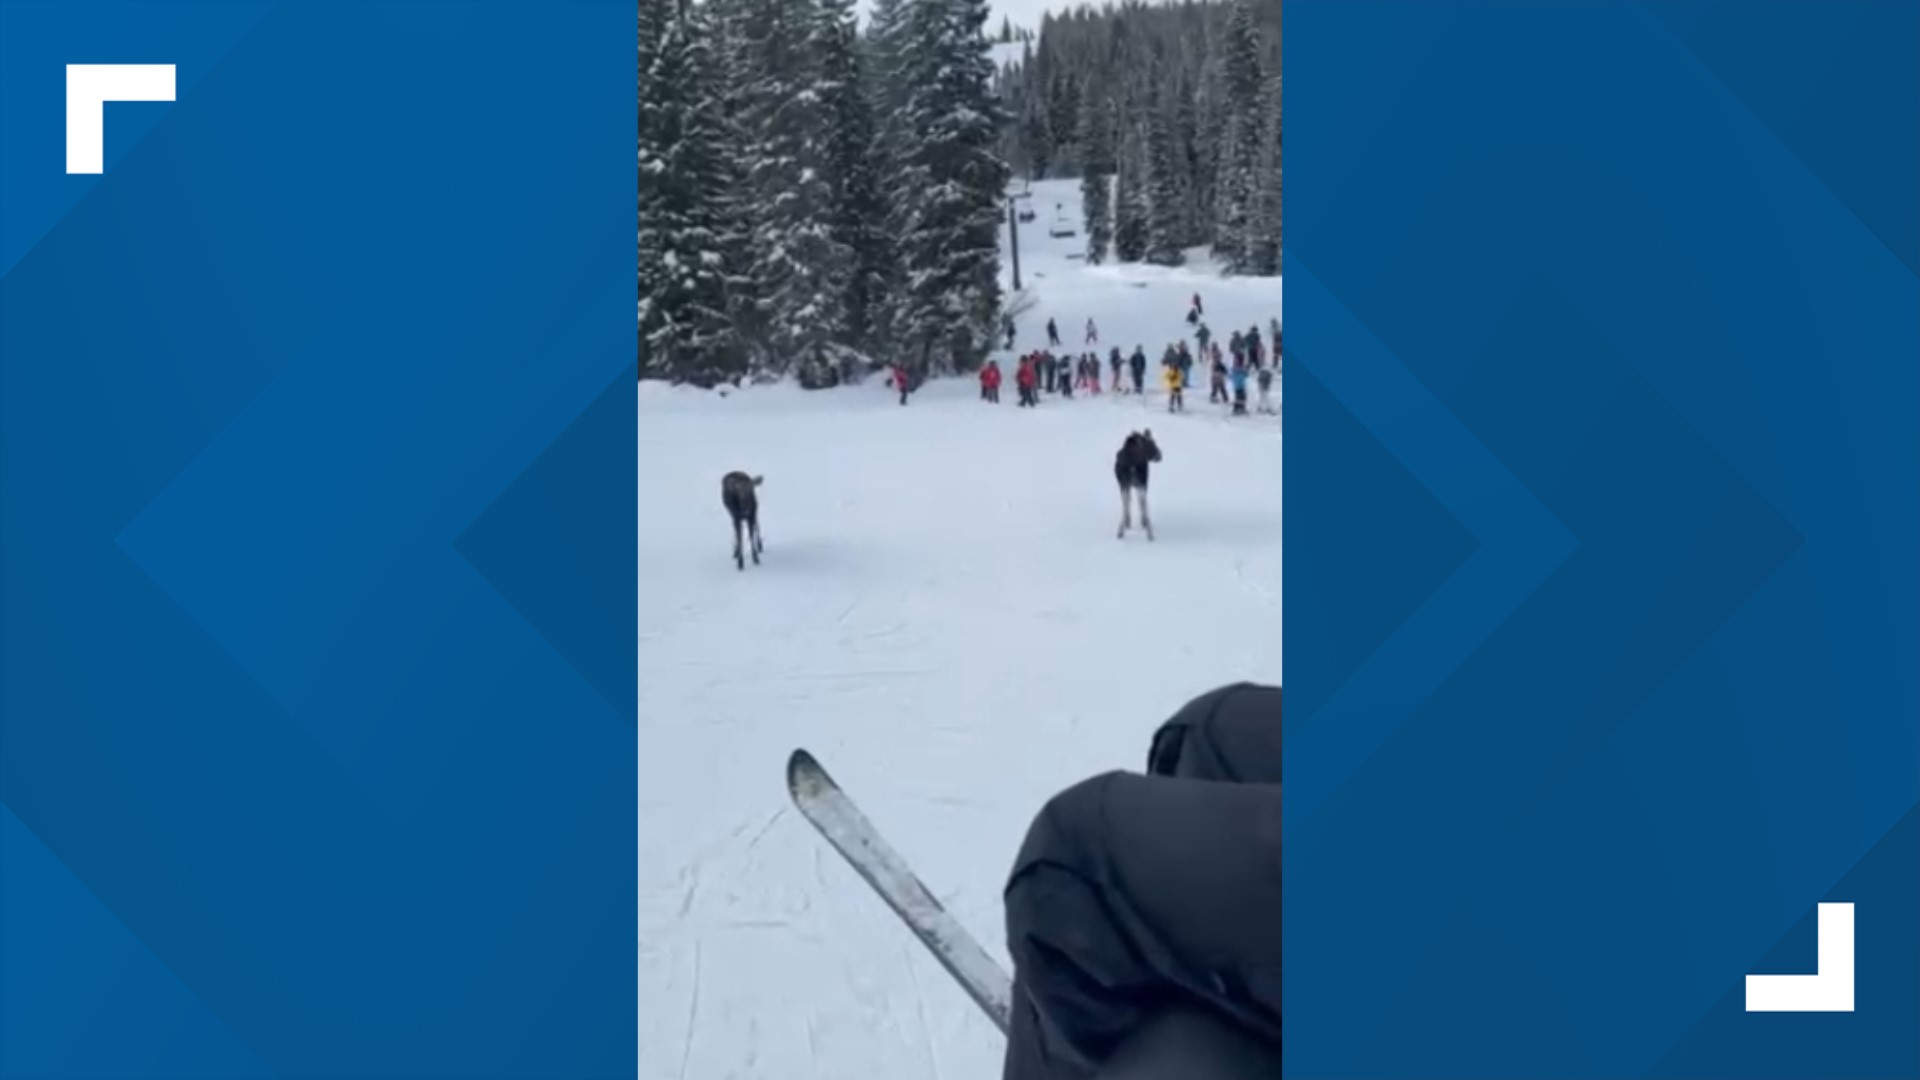 Two moose wandered their way onto the slopes at Winter Park on Saturday.